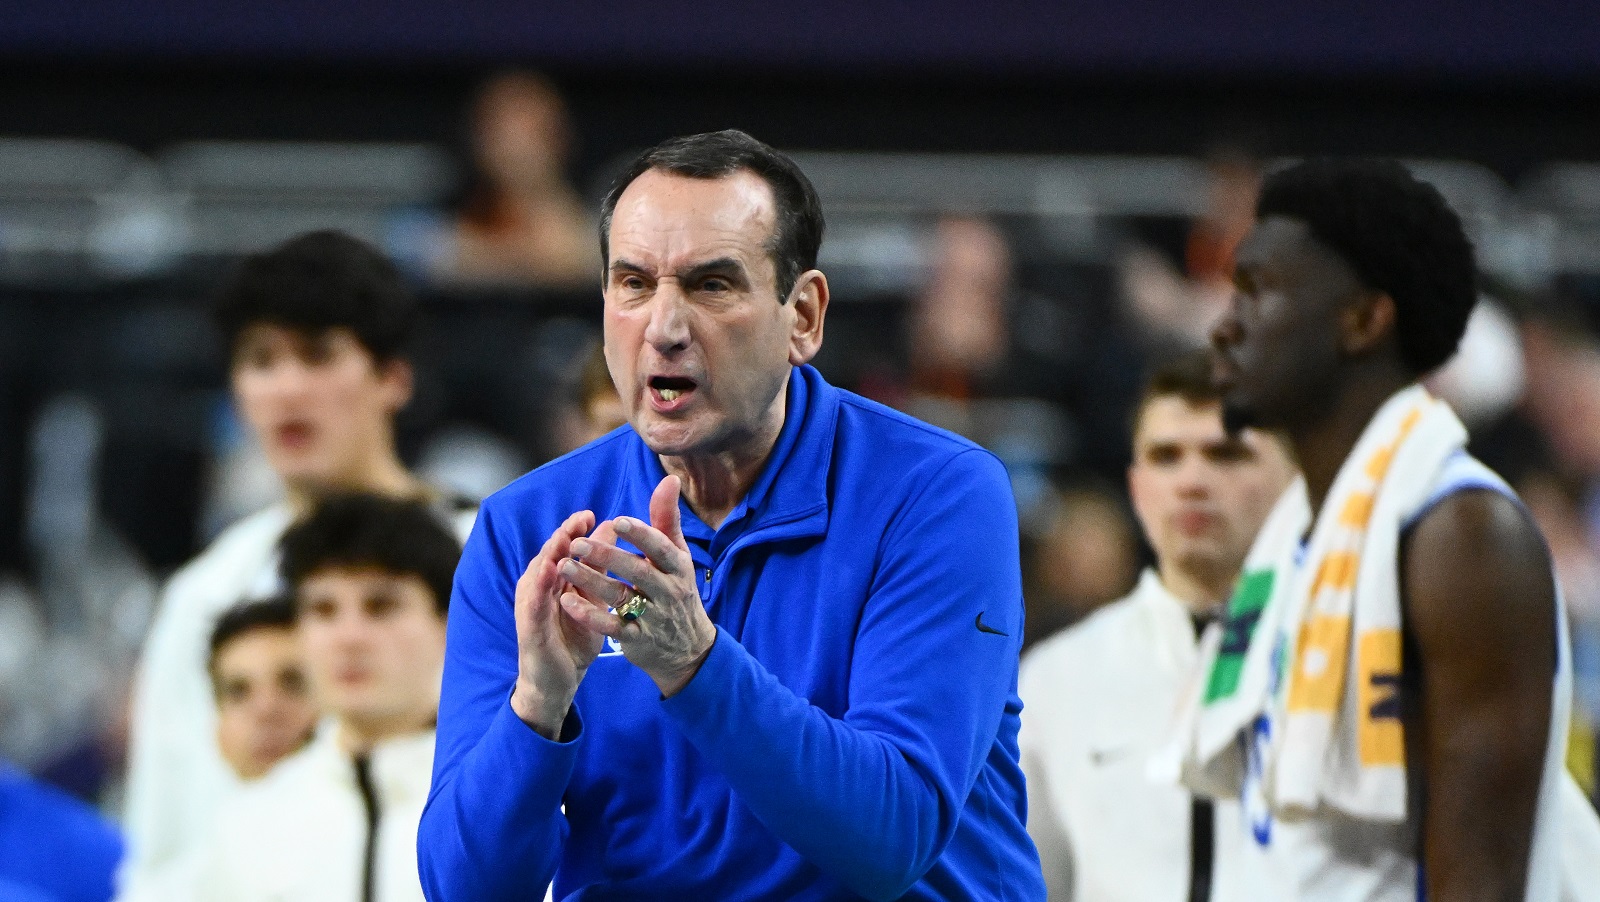 Mike Krzyzewski Reveals How His Health Nearly Cost Him His Job and Marriage